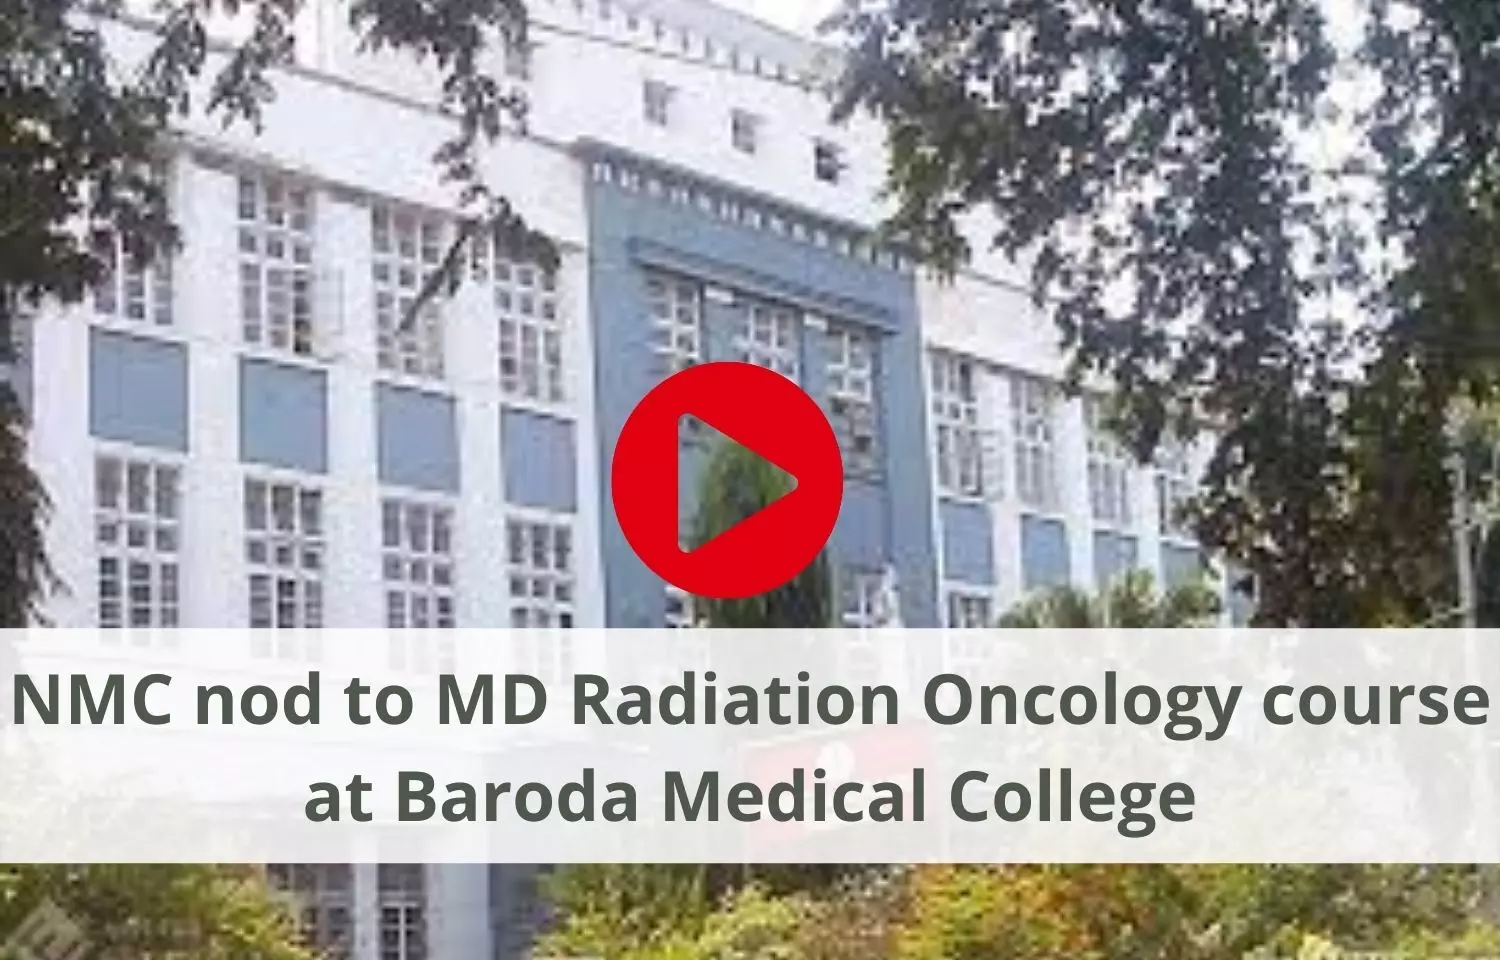 NMC nod to MD Radiation Oncology course at Baroda Medical College